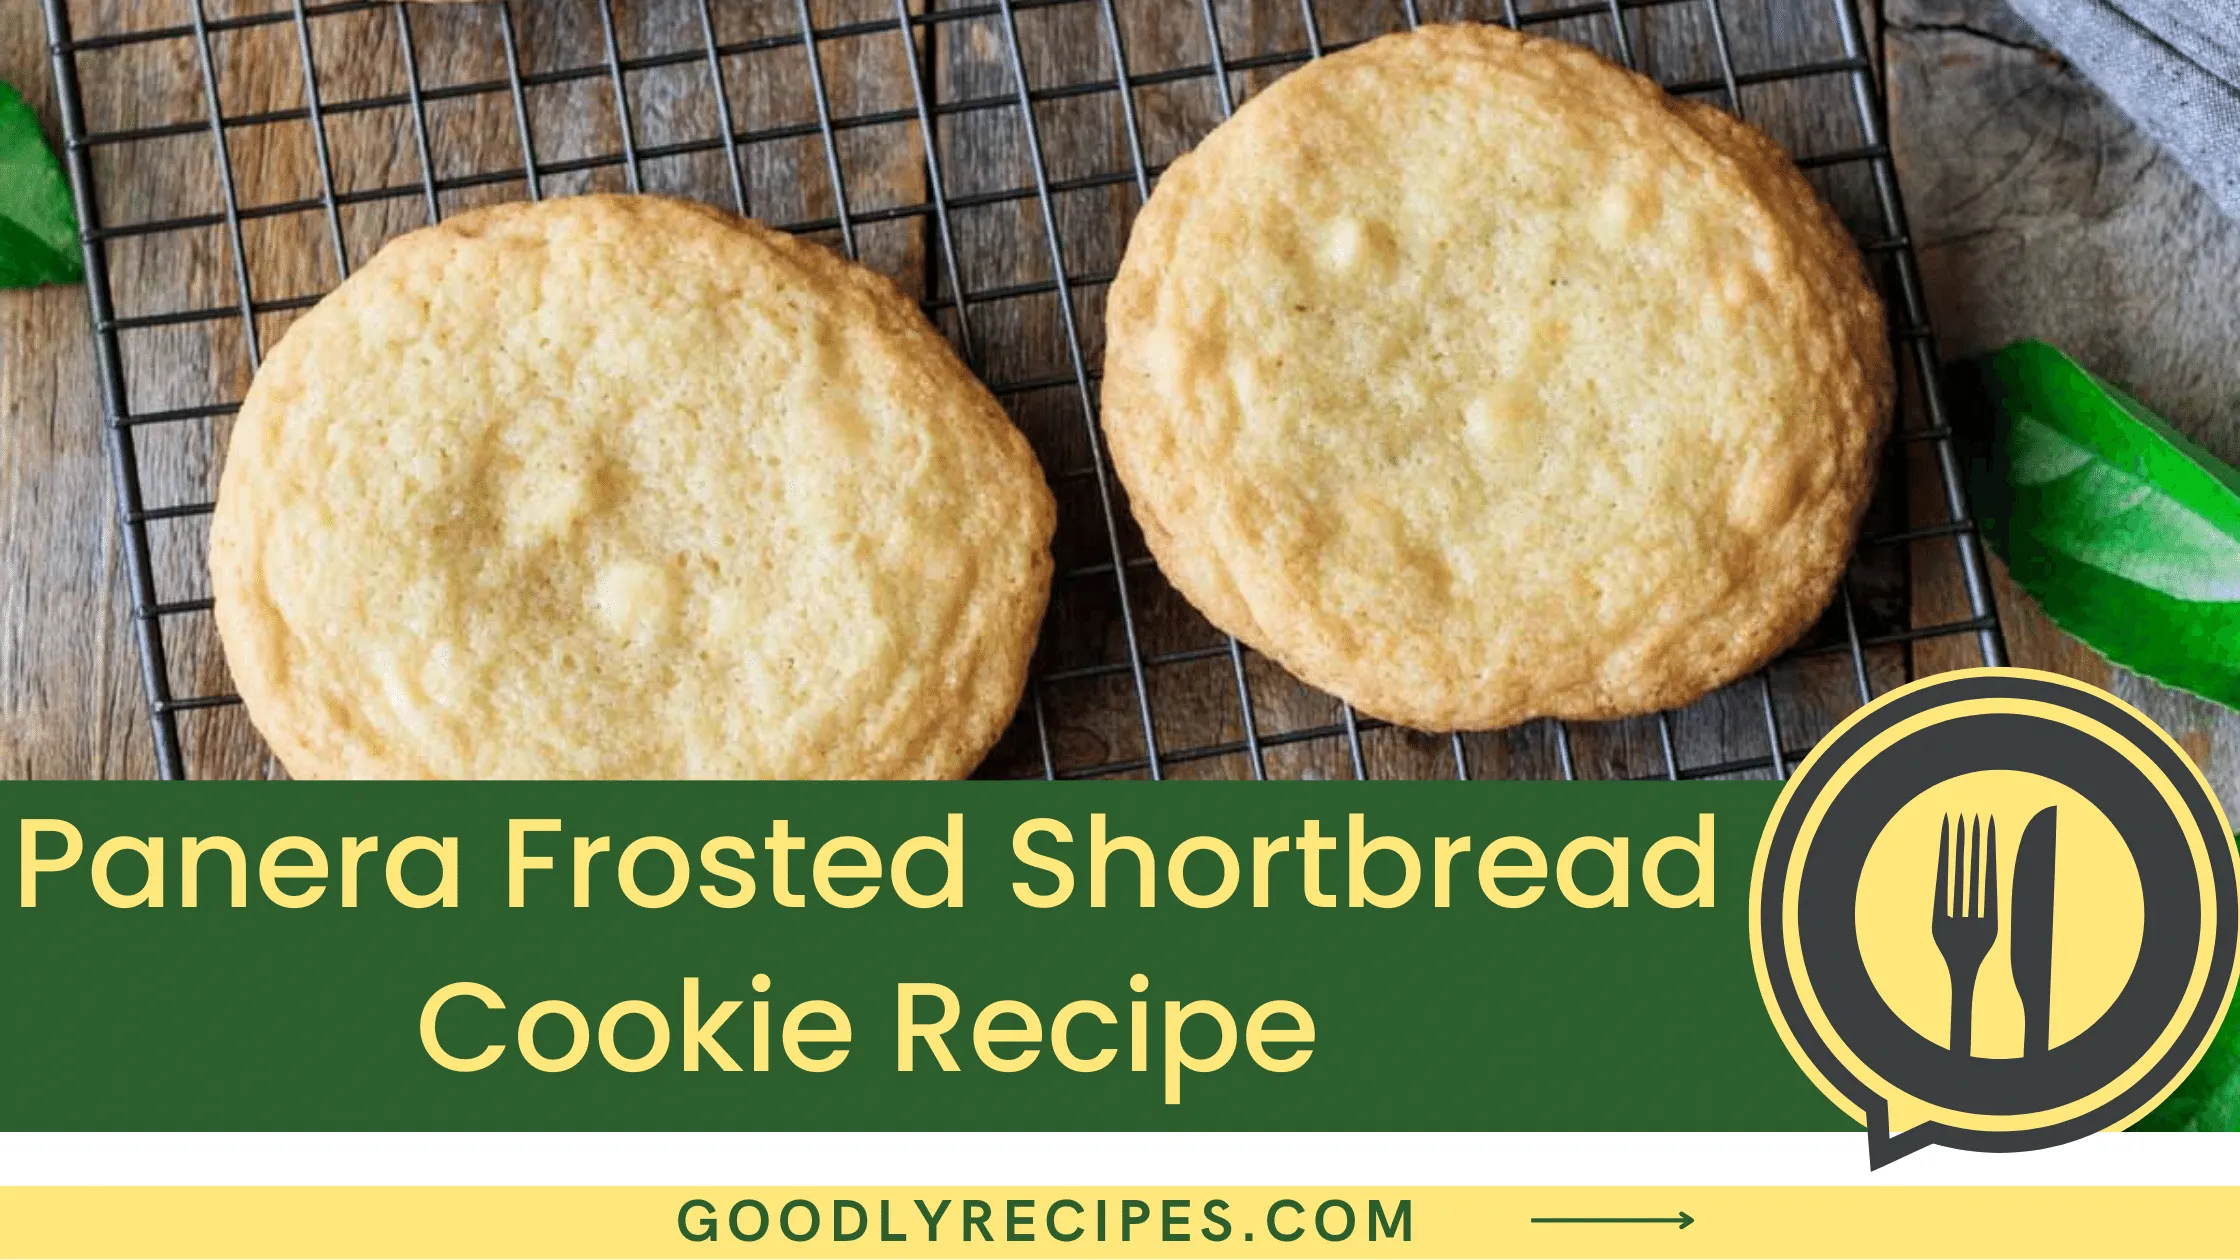 Panera Frosted Shortbread Cookie Recipe